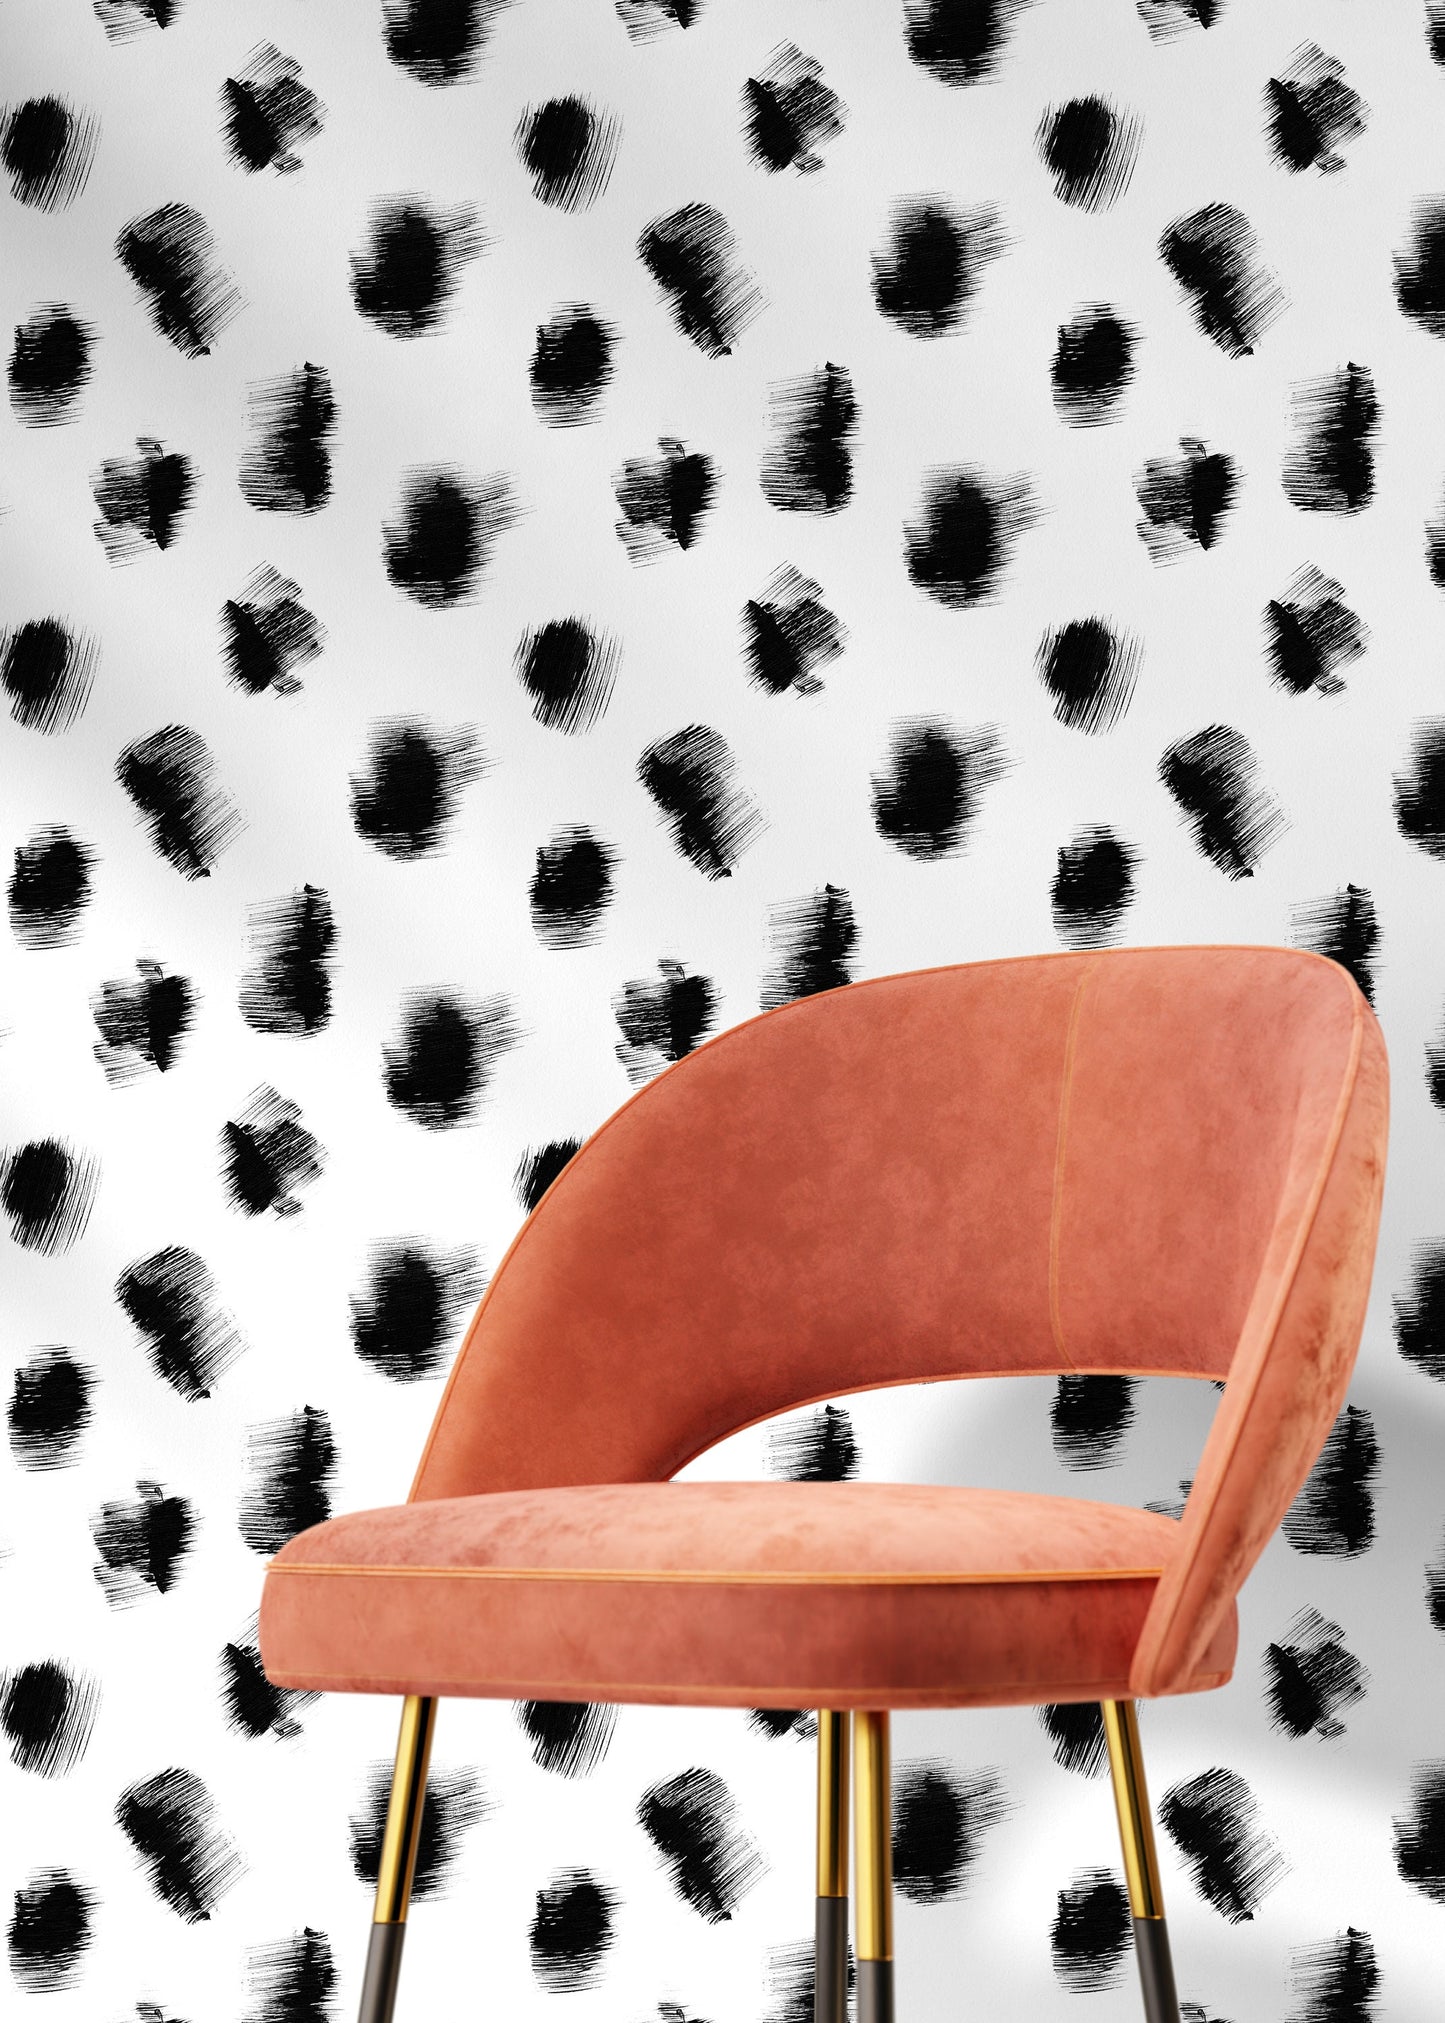 Black and White Speckle Dots Wallpaper / Peel and Stick Wallpaper Removable Wallpaper Home Decor Wall Art Wall Decor Room Decor - C895